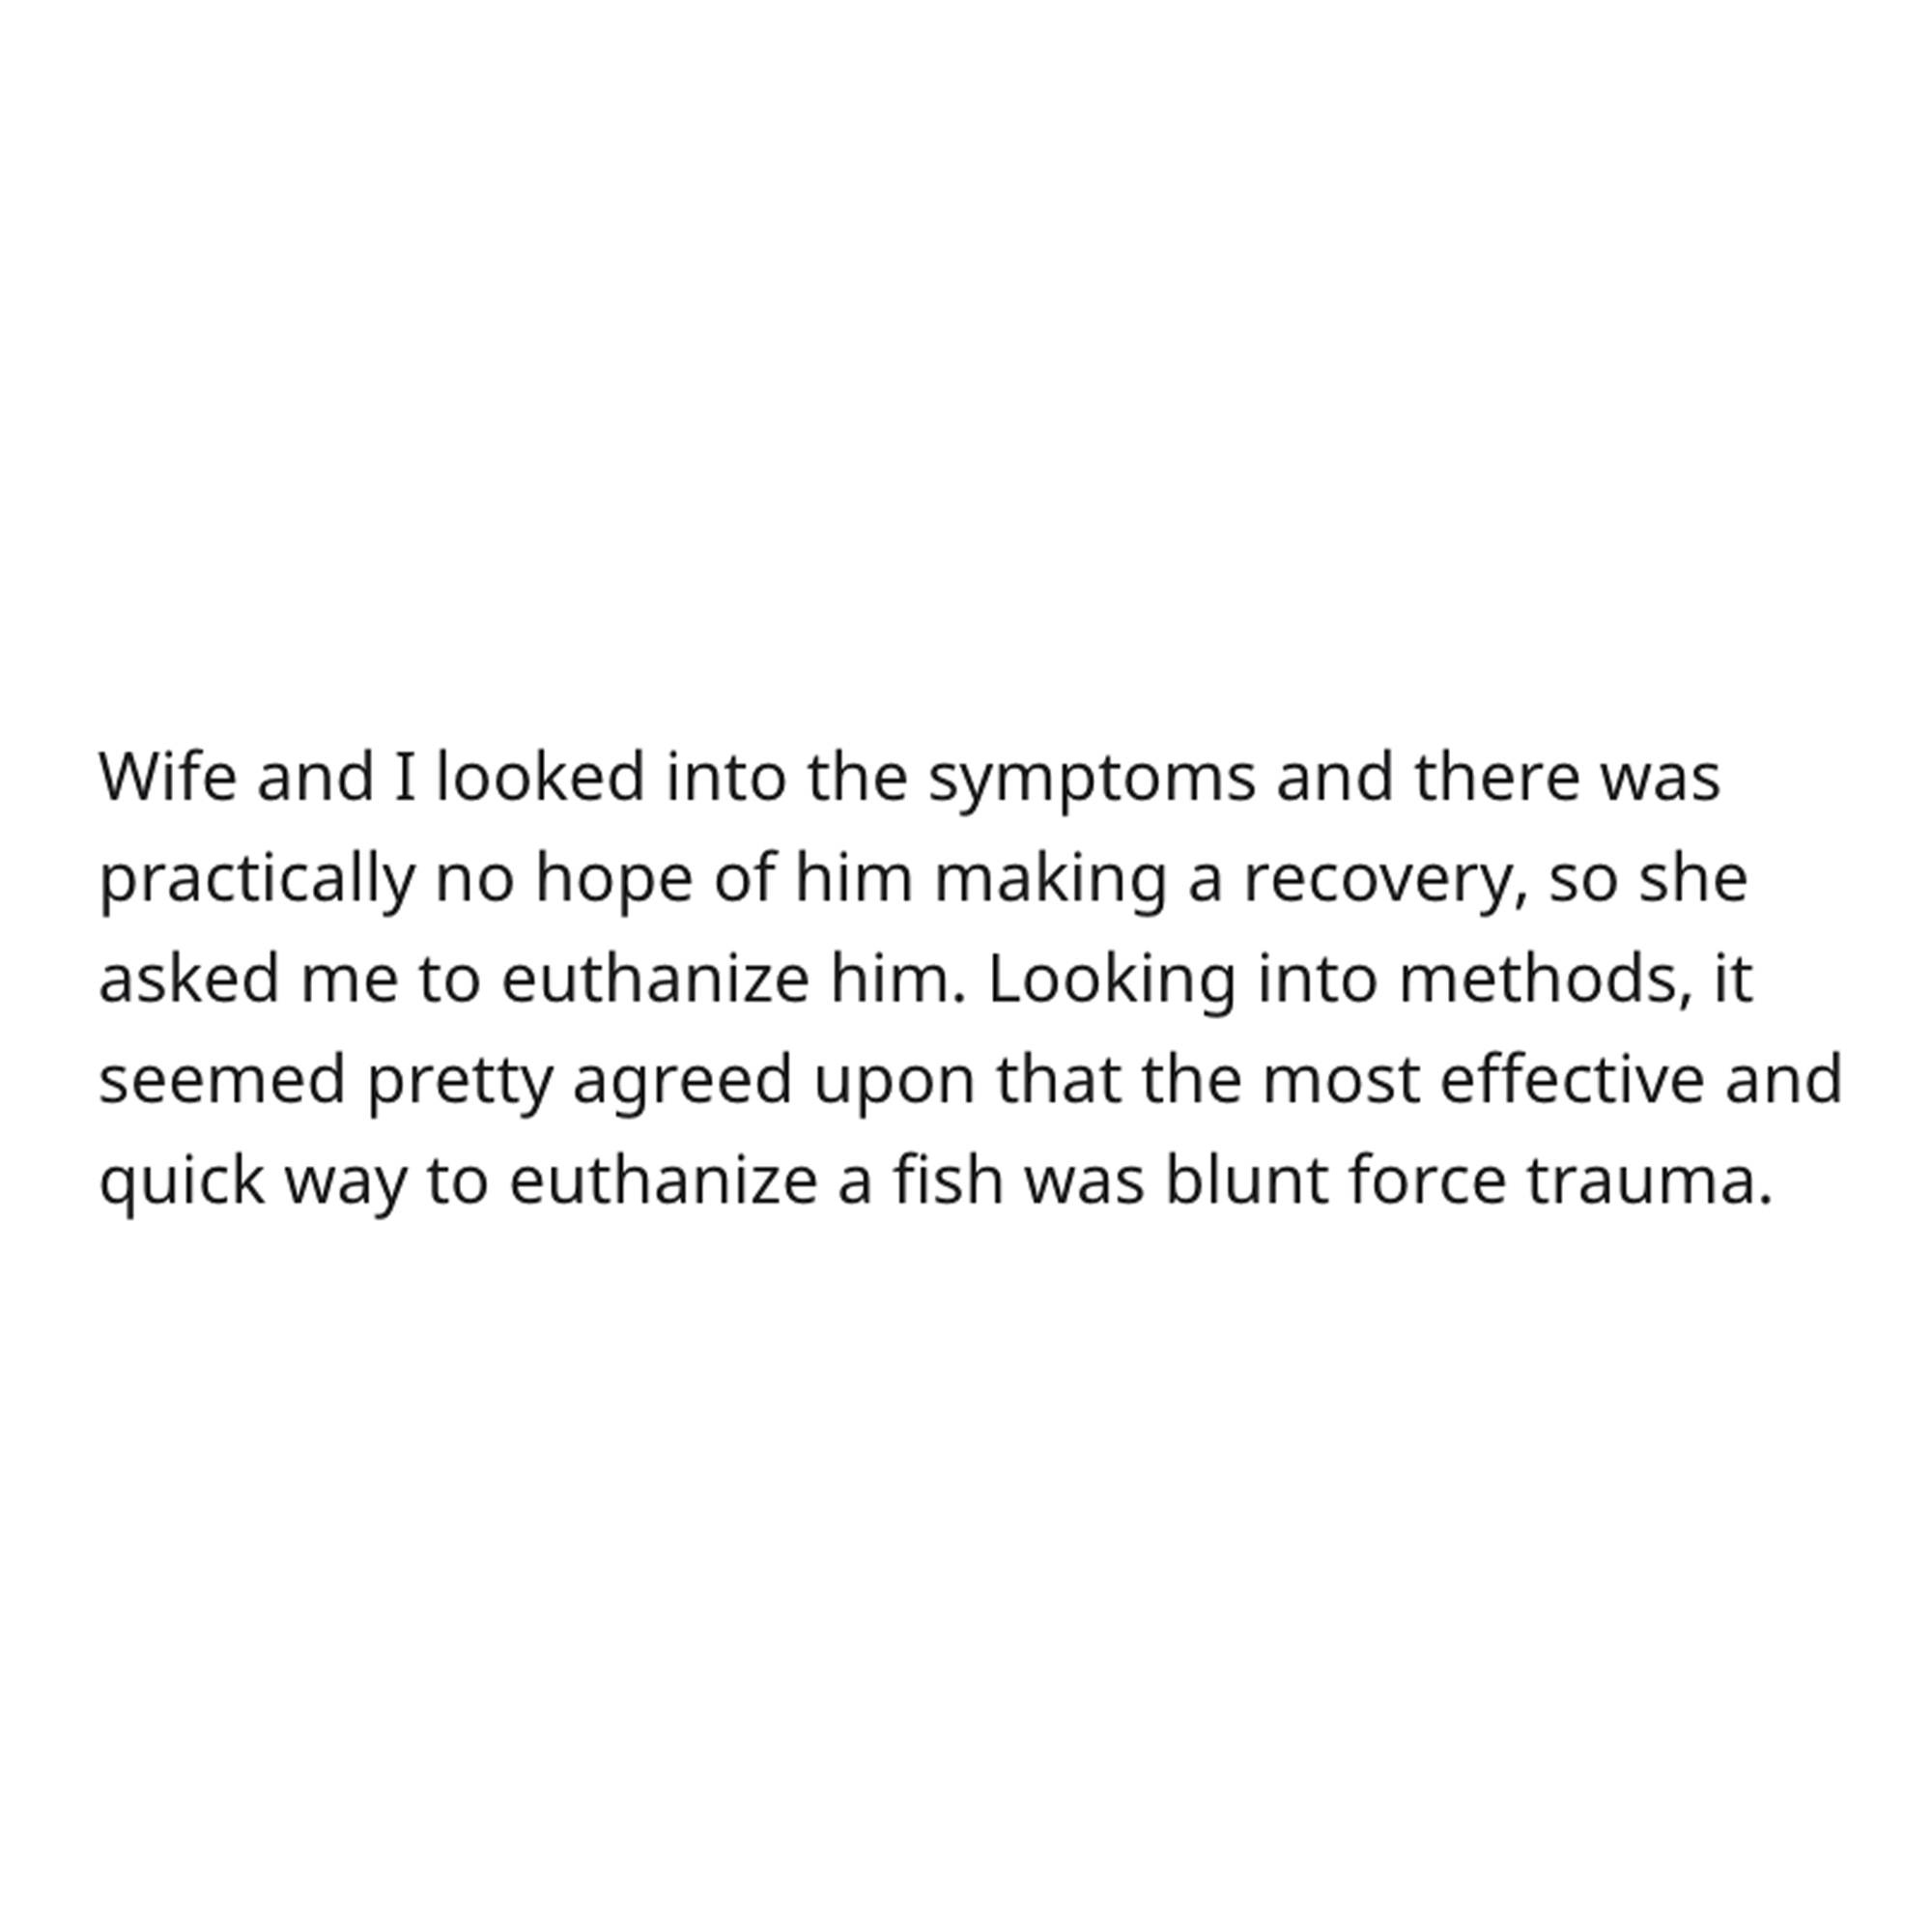 goldfish story - quote karma - Wife and I looked into the symptoms and there was practically no hope of him making a recovery, so she asked me to euthanize him. Looking into methods, it seemed pretty agreed upon that the most effective and quick way to eu